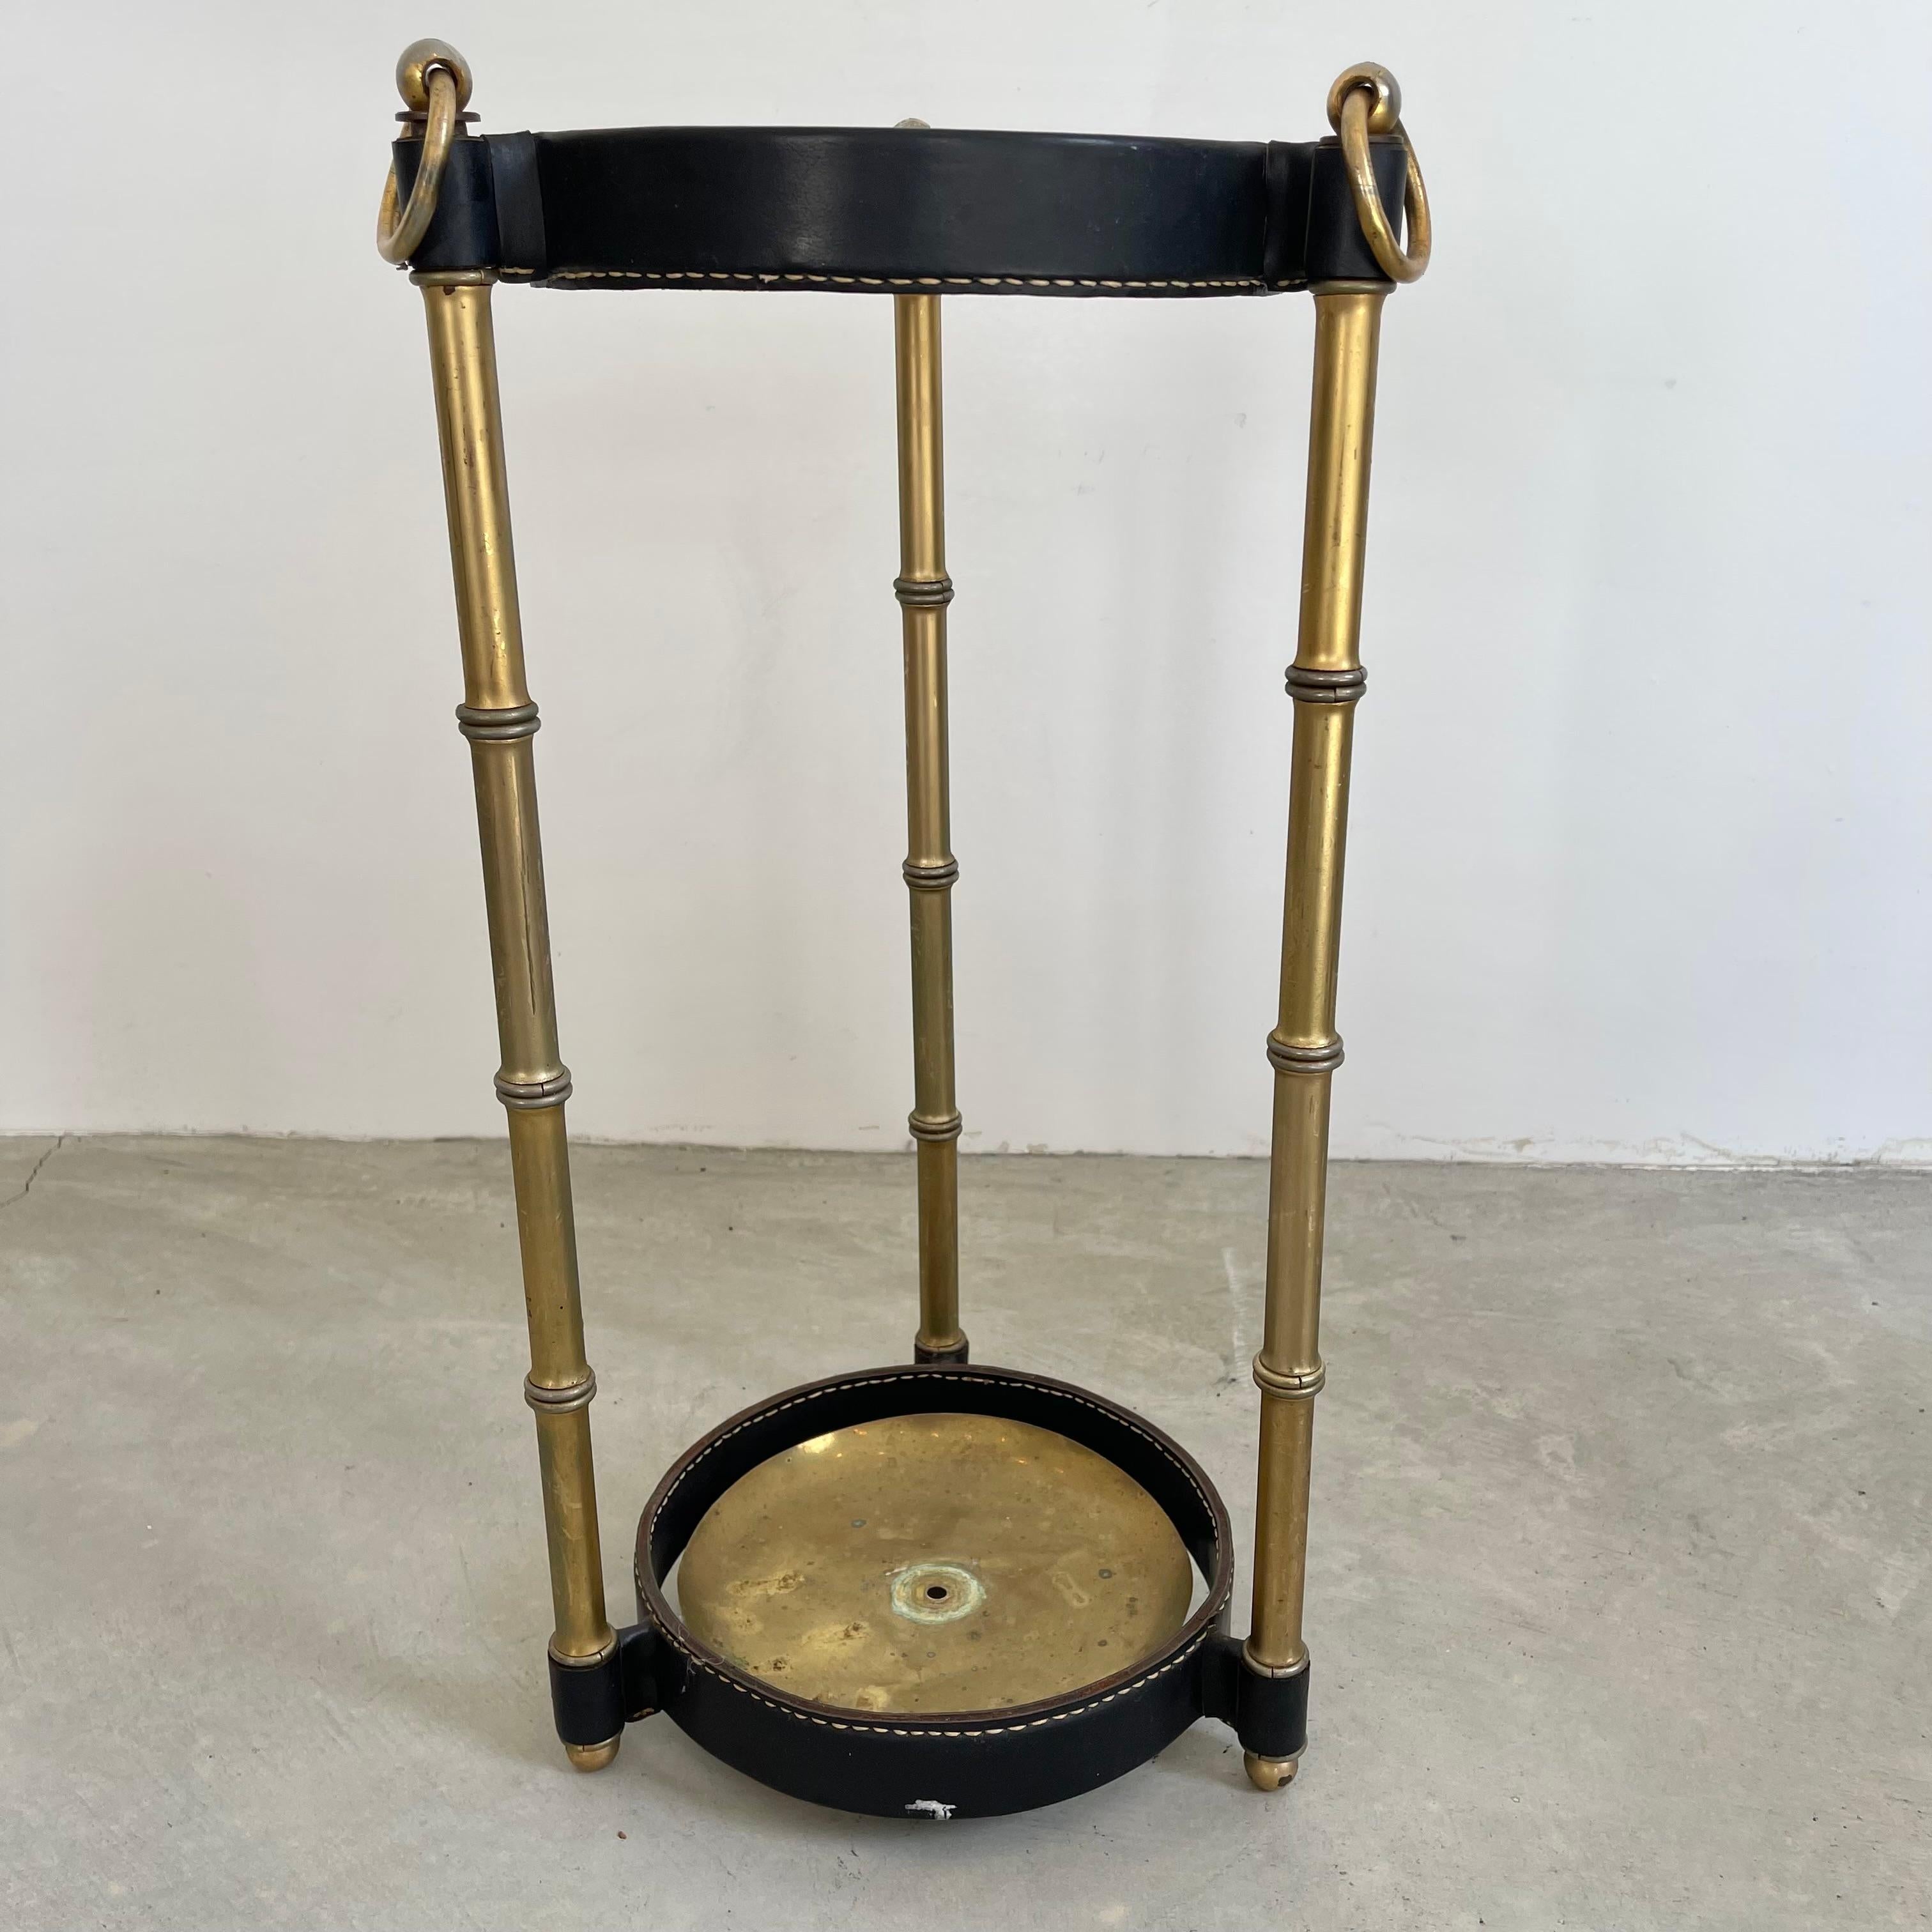 Handsome umbrella stand by Jacques Adnet. Metal upper and lower rings of the frame are wrapped in black leather stitched together with Adnet's signature contrast stitching. Three brass bamboo legs make up the frame with a brass dish at the bottom to